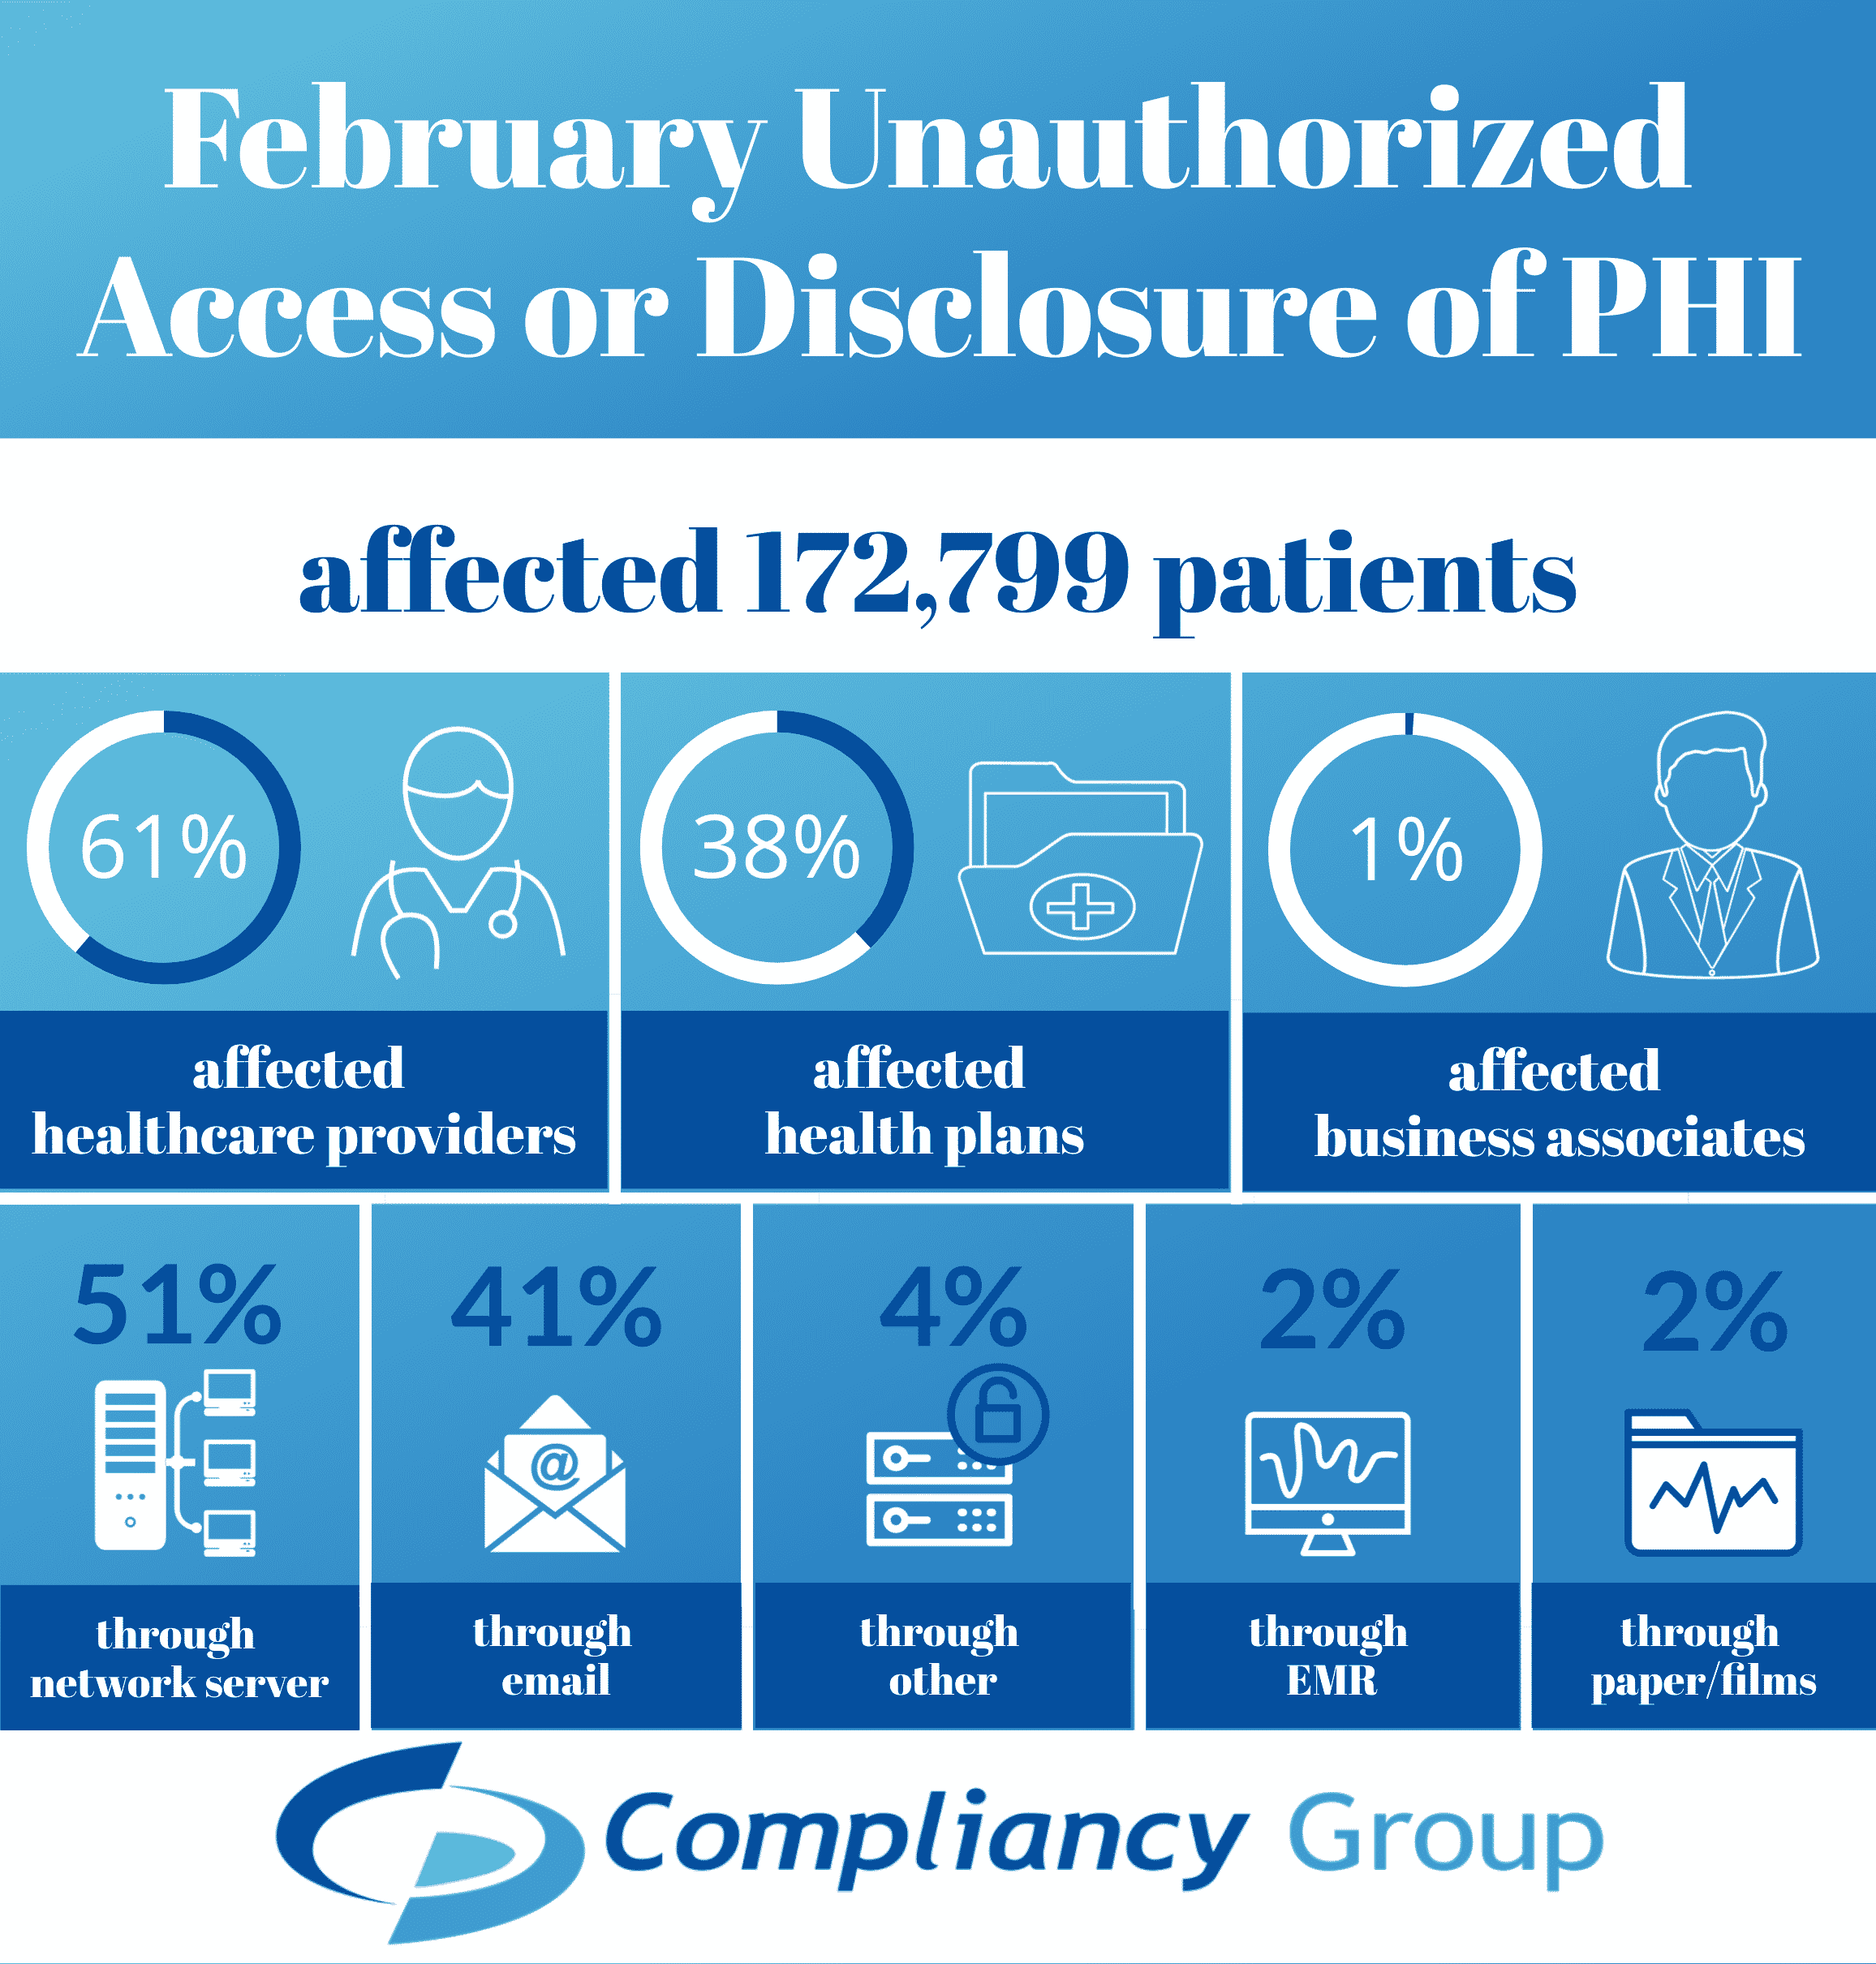 February Unauthorized Access or Disclosures